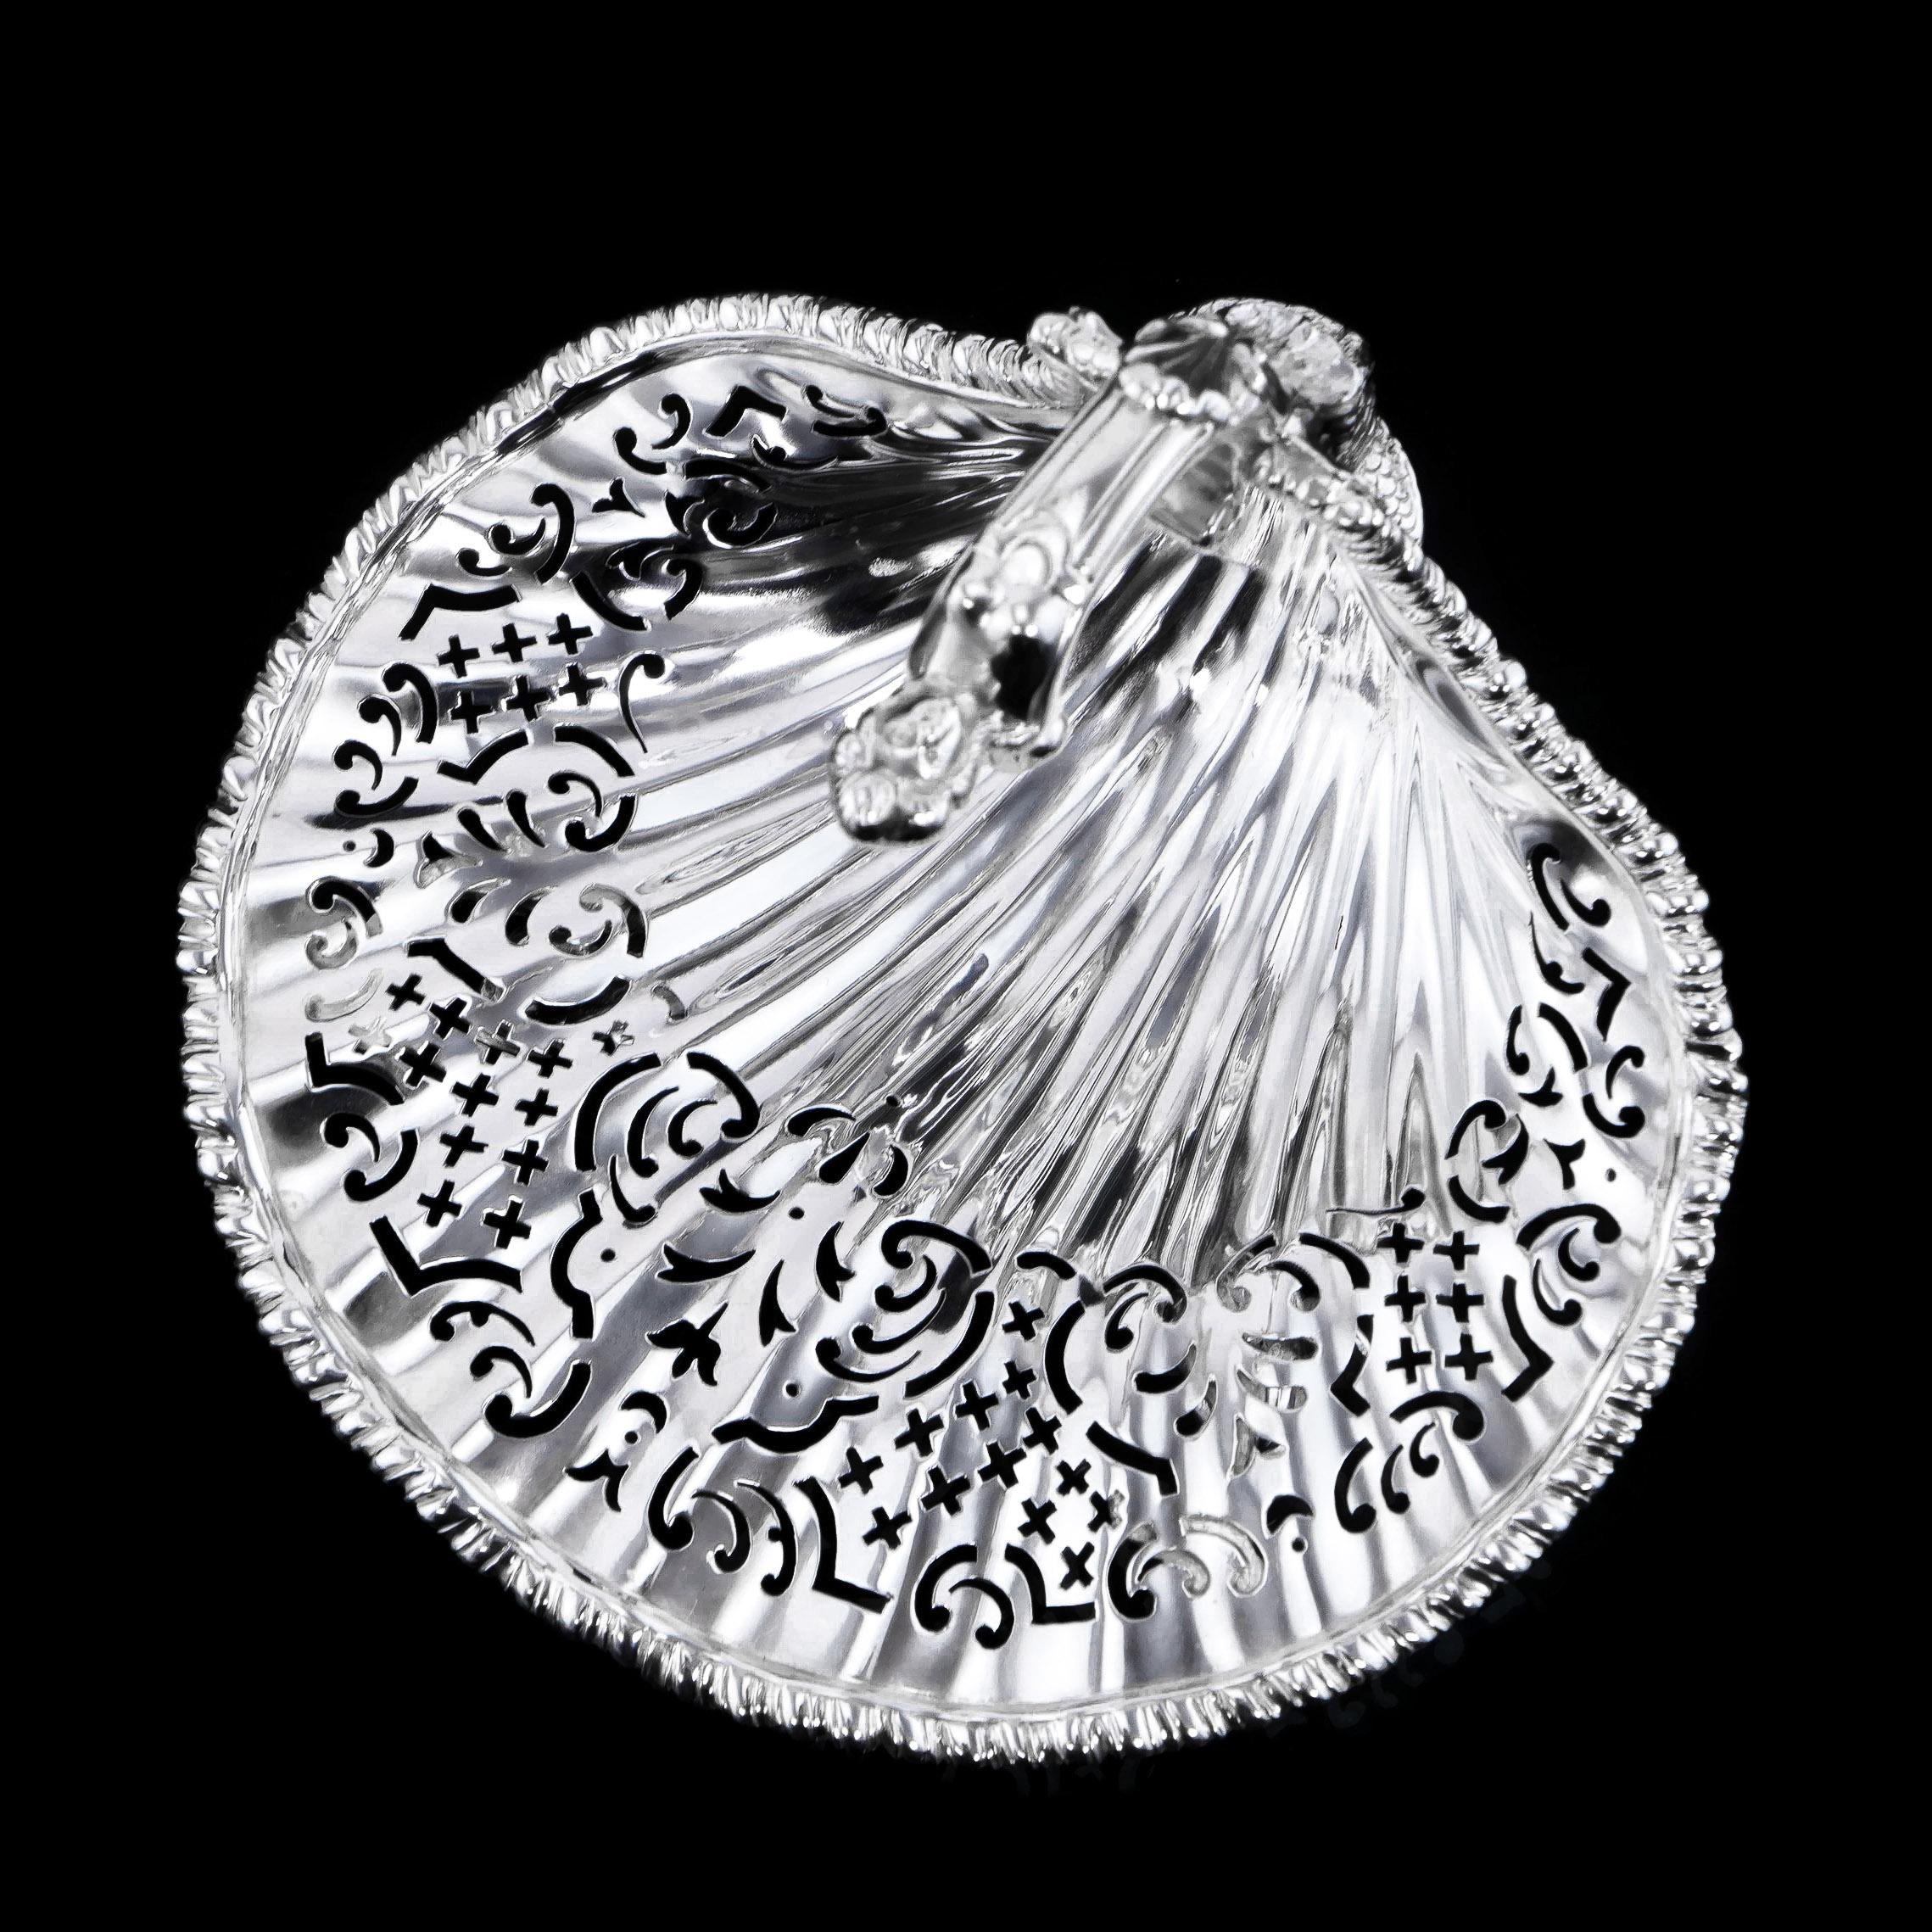 Antique SterlingSilver Rococo Shell Dish in the Manner of Paul de Lamerie - 1908 For Sale 9